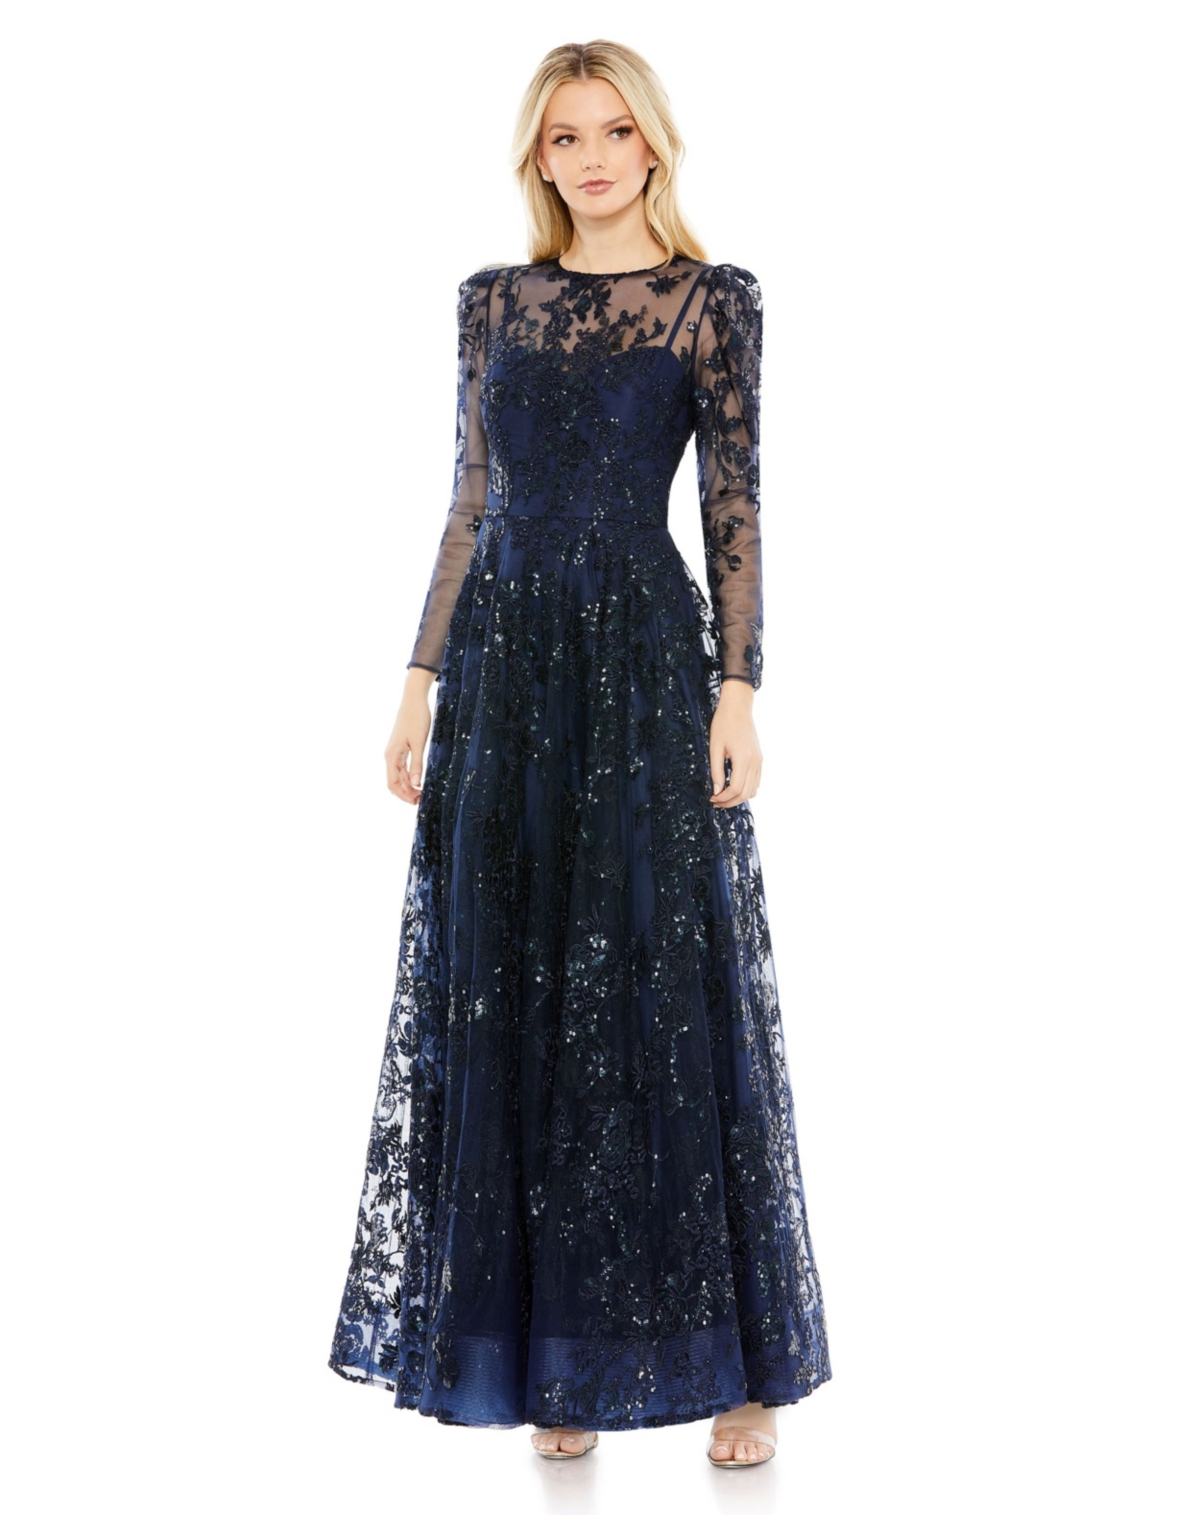 1940s Evening, Prom, Party, Formal, Ball Gowns Womens Embroidered Illusion High Neck A Line Dress - Navy $598.00 AT vintagedancer.com